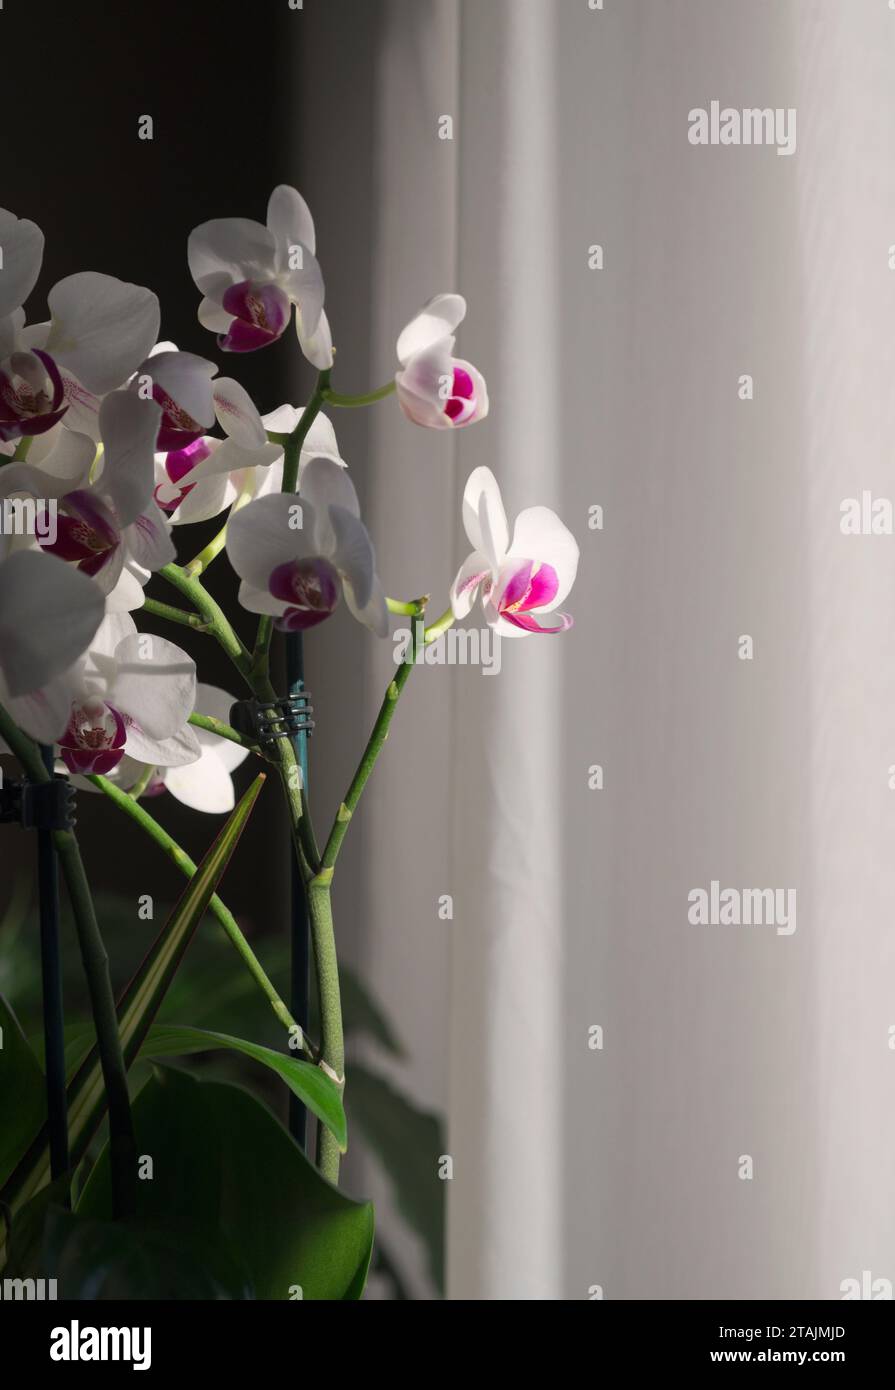 white with pink midpoint orchid flowers near a window curtain Stock Photo